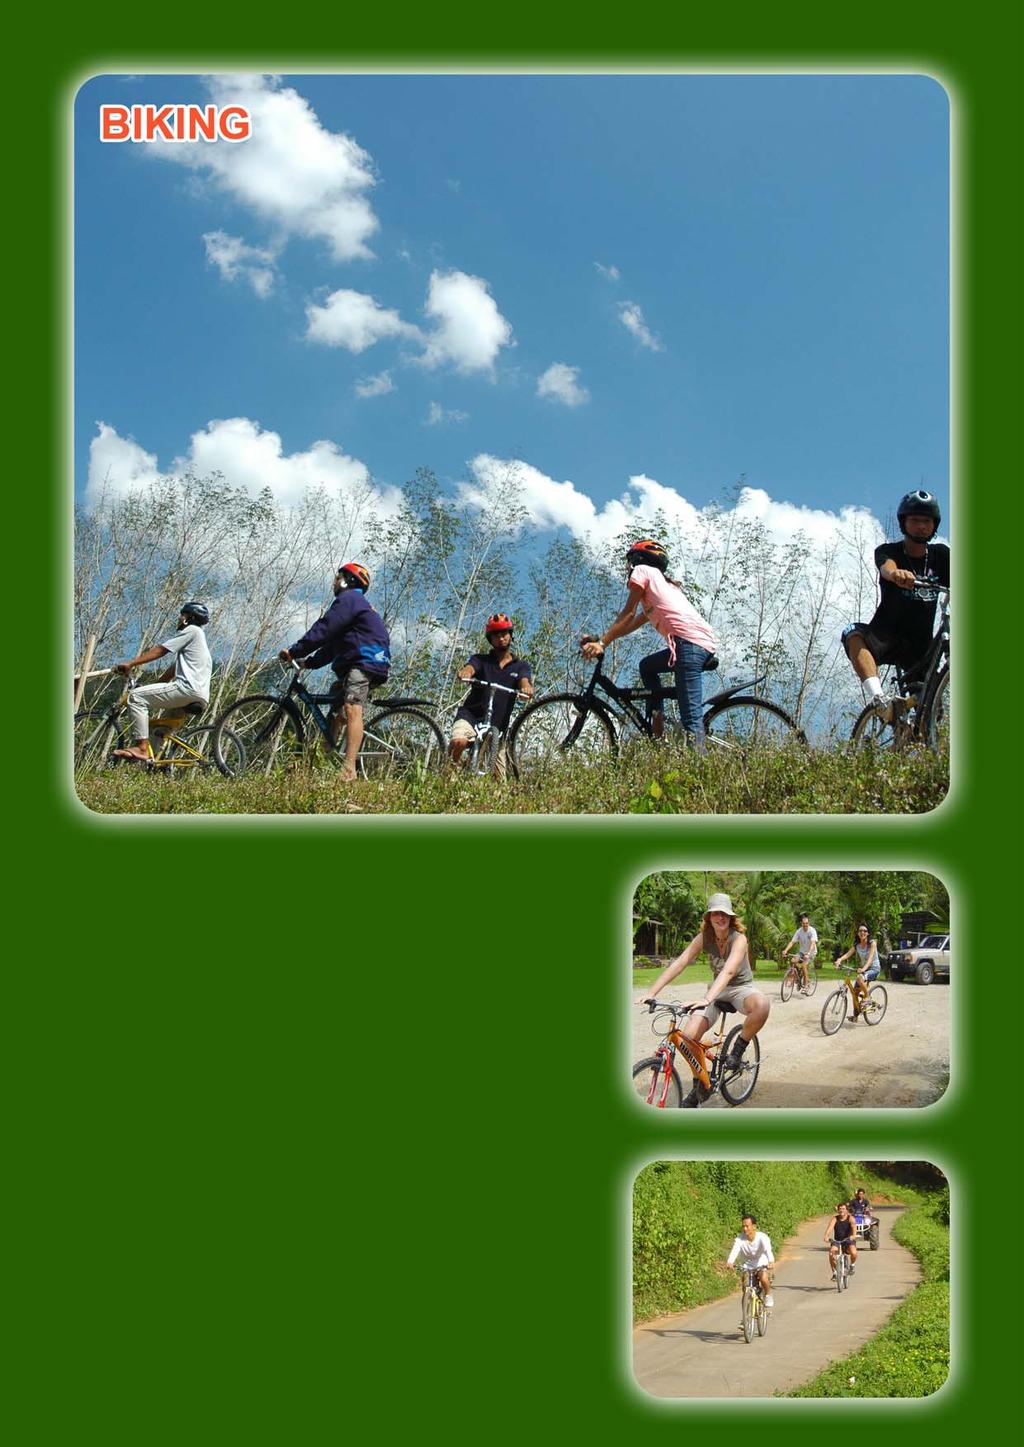 Biking Tour Code (SLC 04) Cycling on the bike along the tiny road, orientates the local way of villager's life, is a good activity to